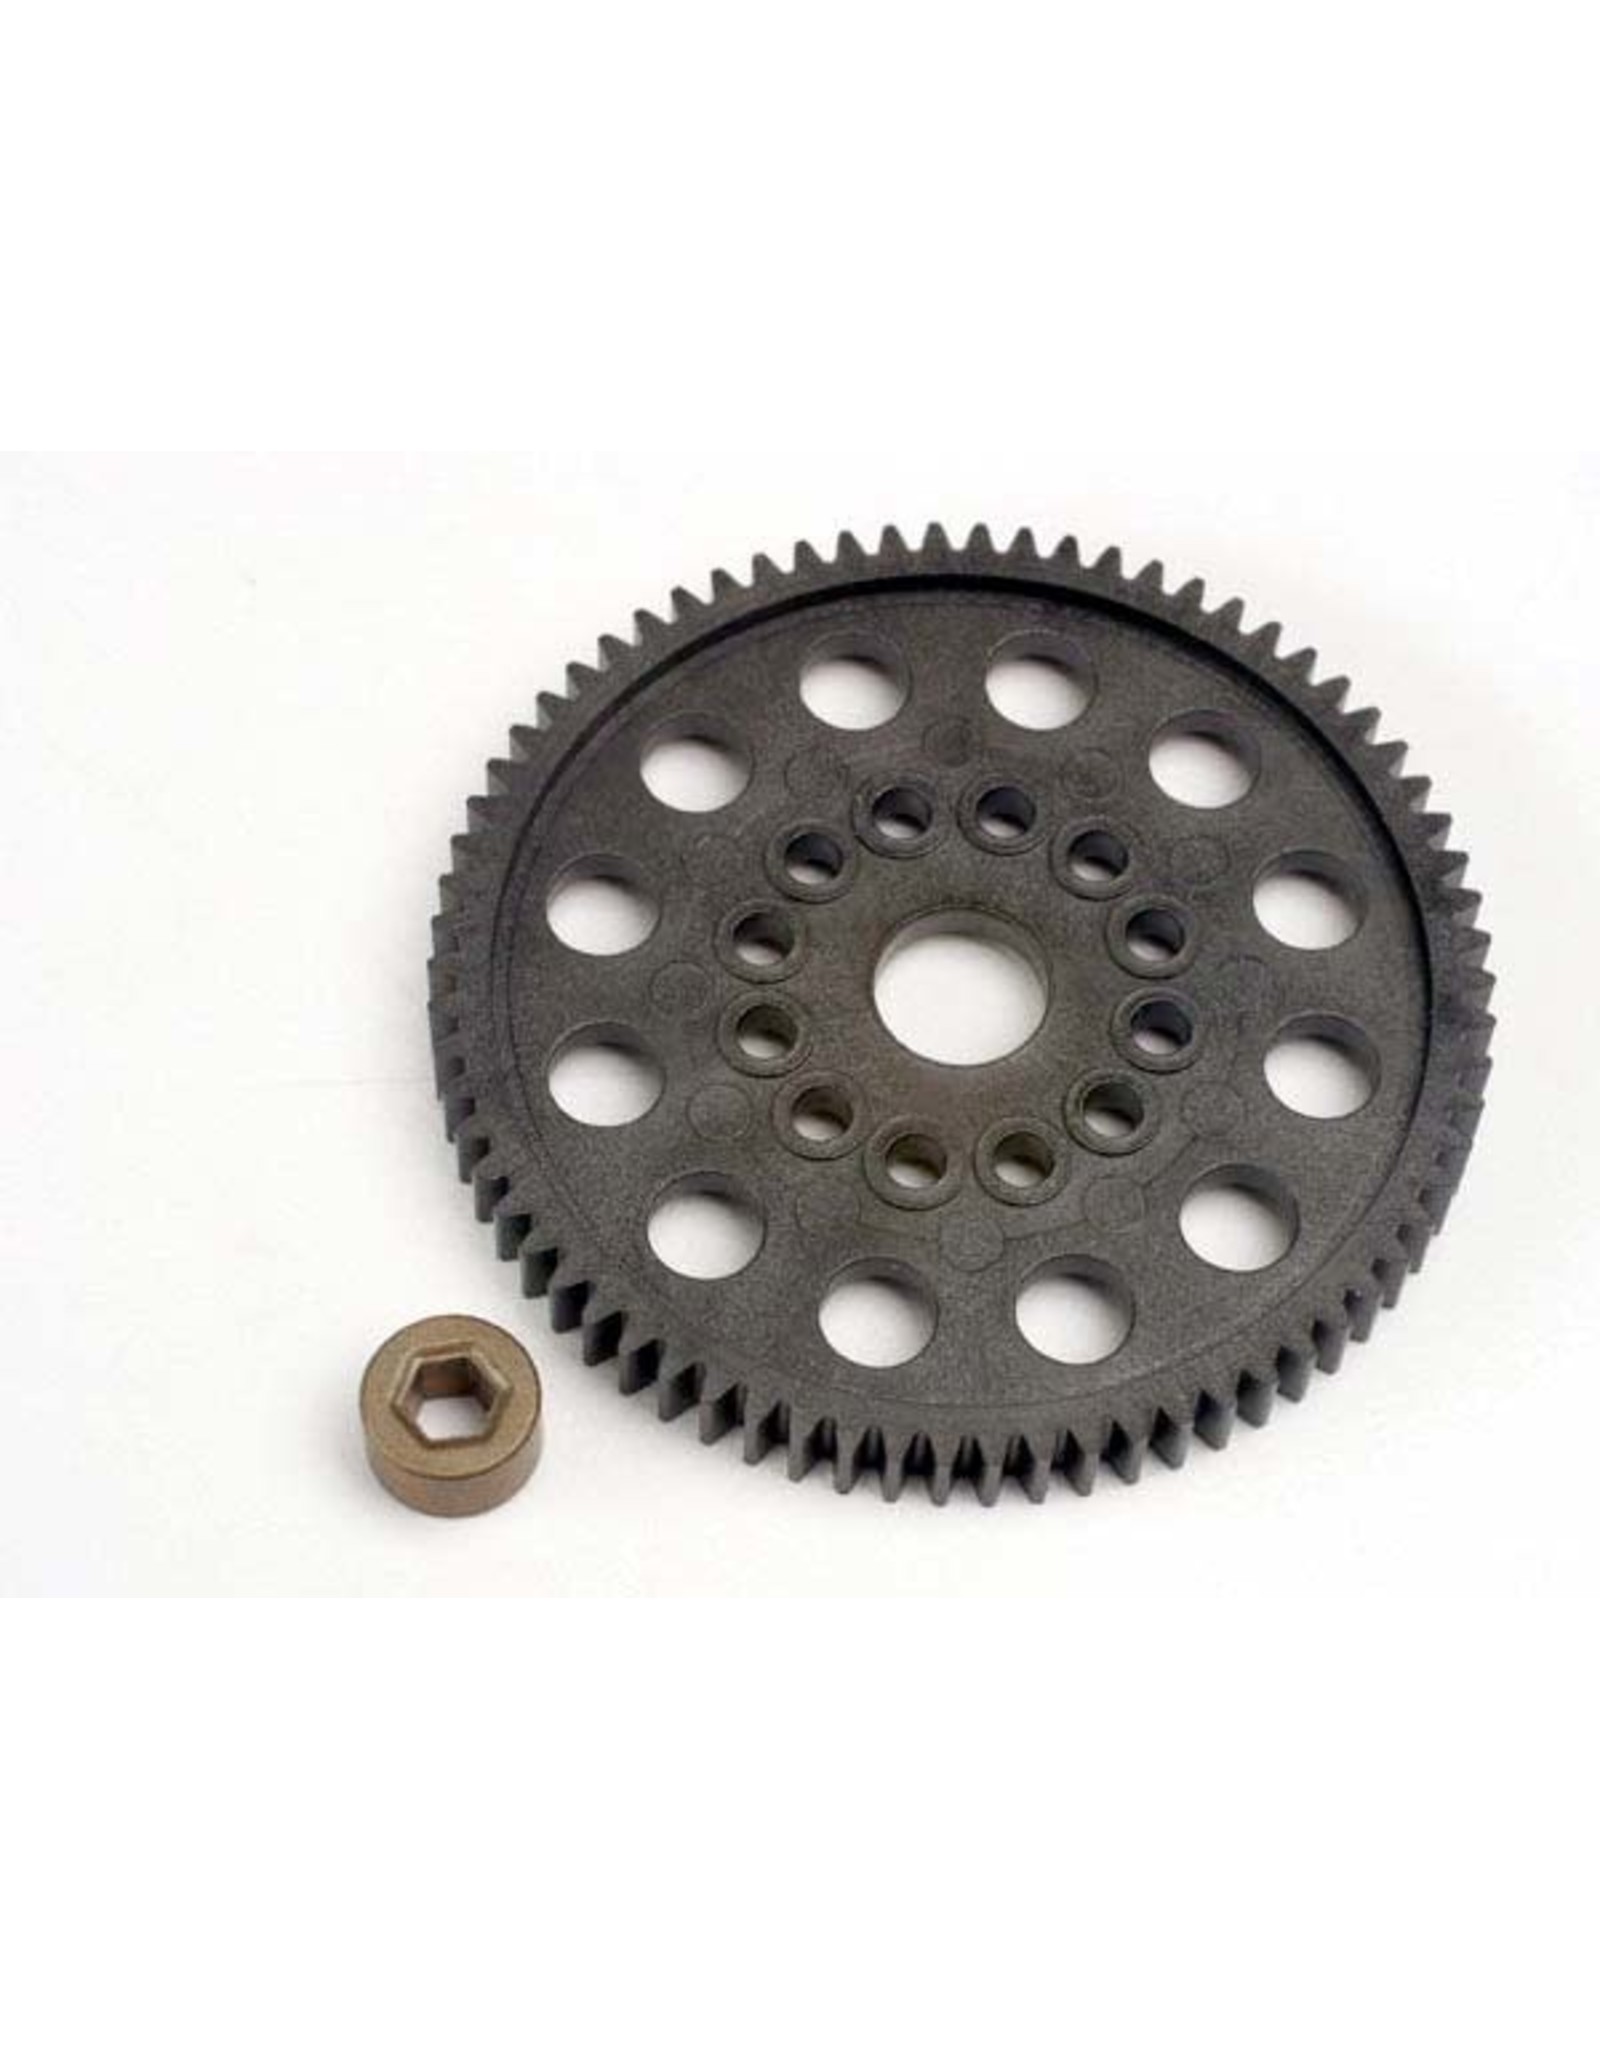 Traxxas Spur gear (70-Tooth) (32-Pitch) w/bushing